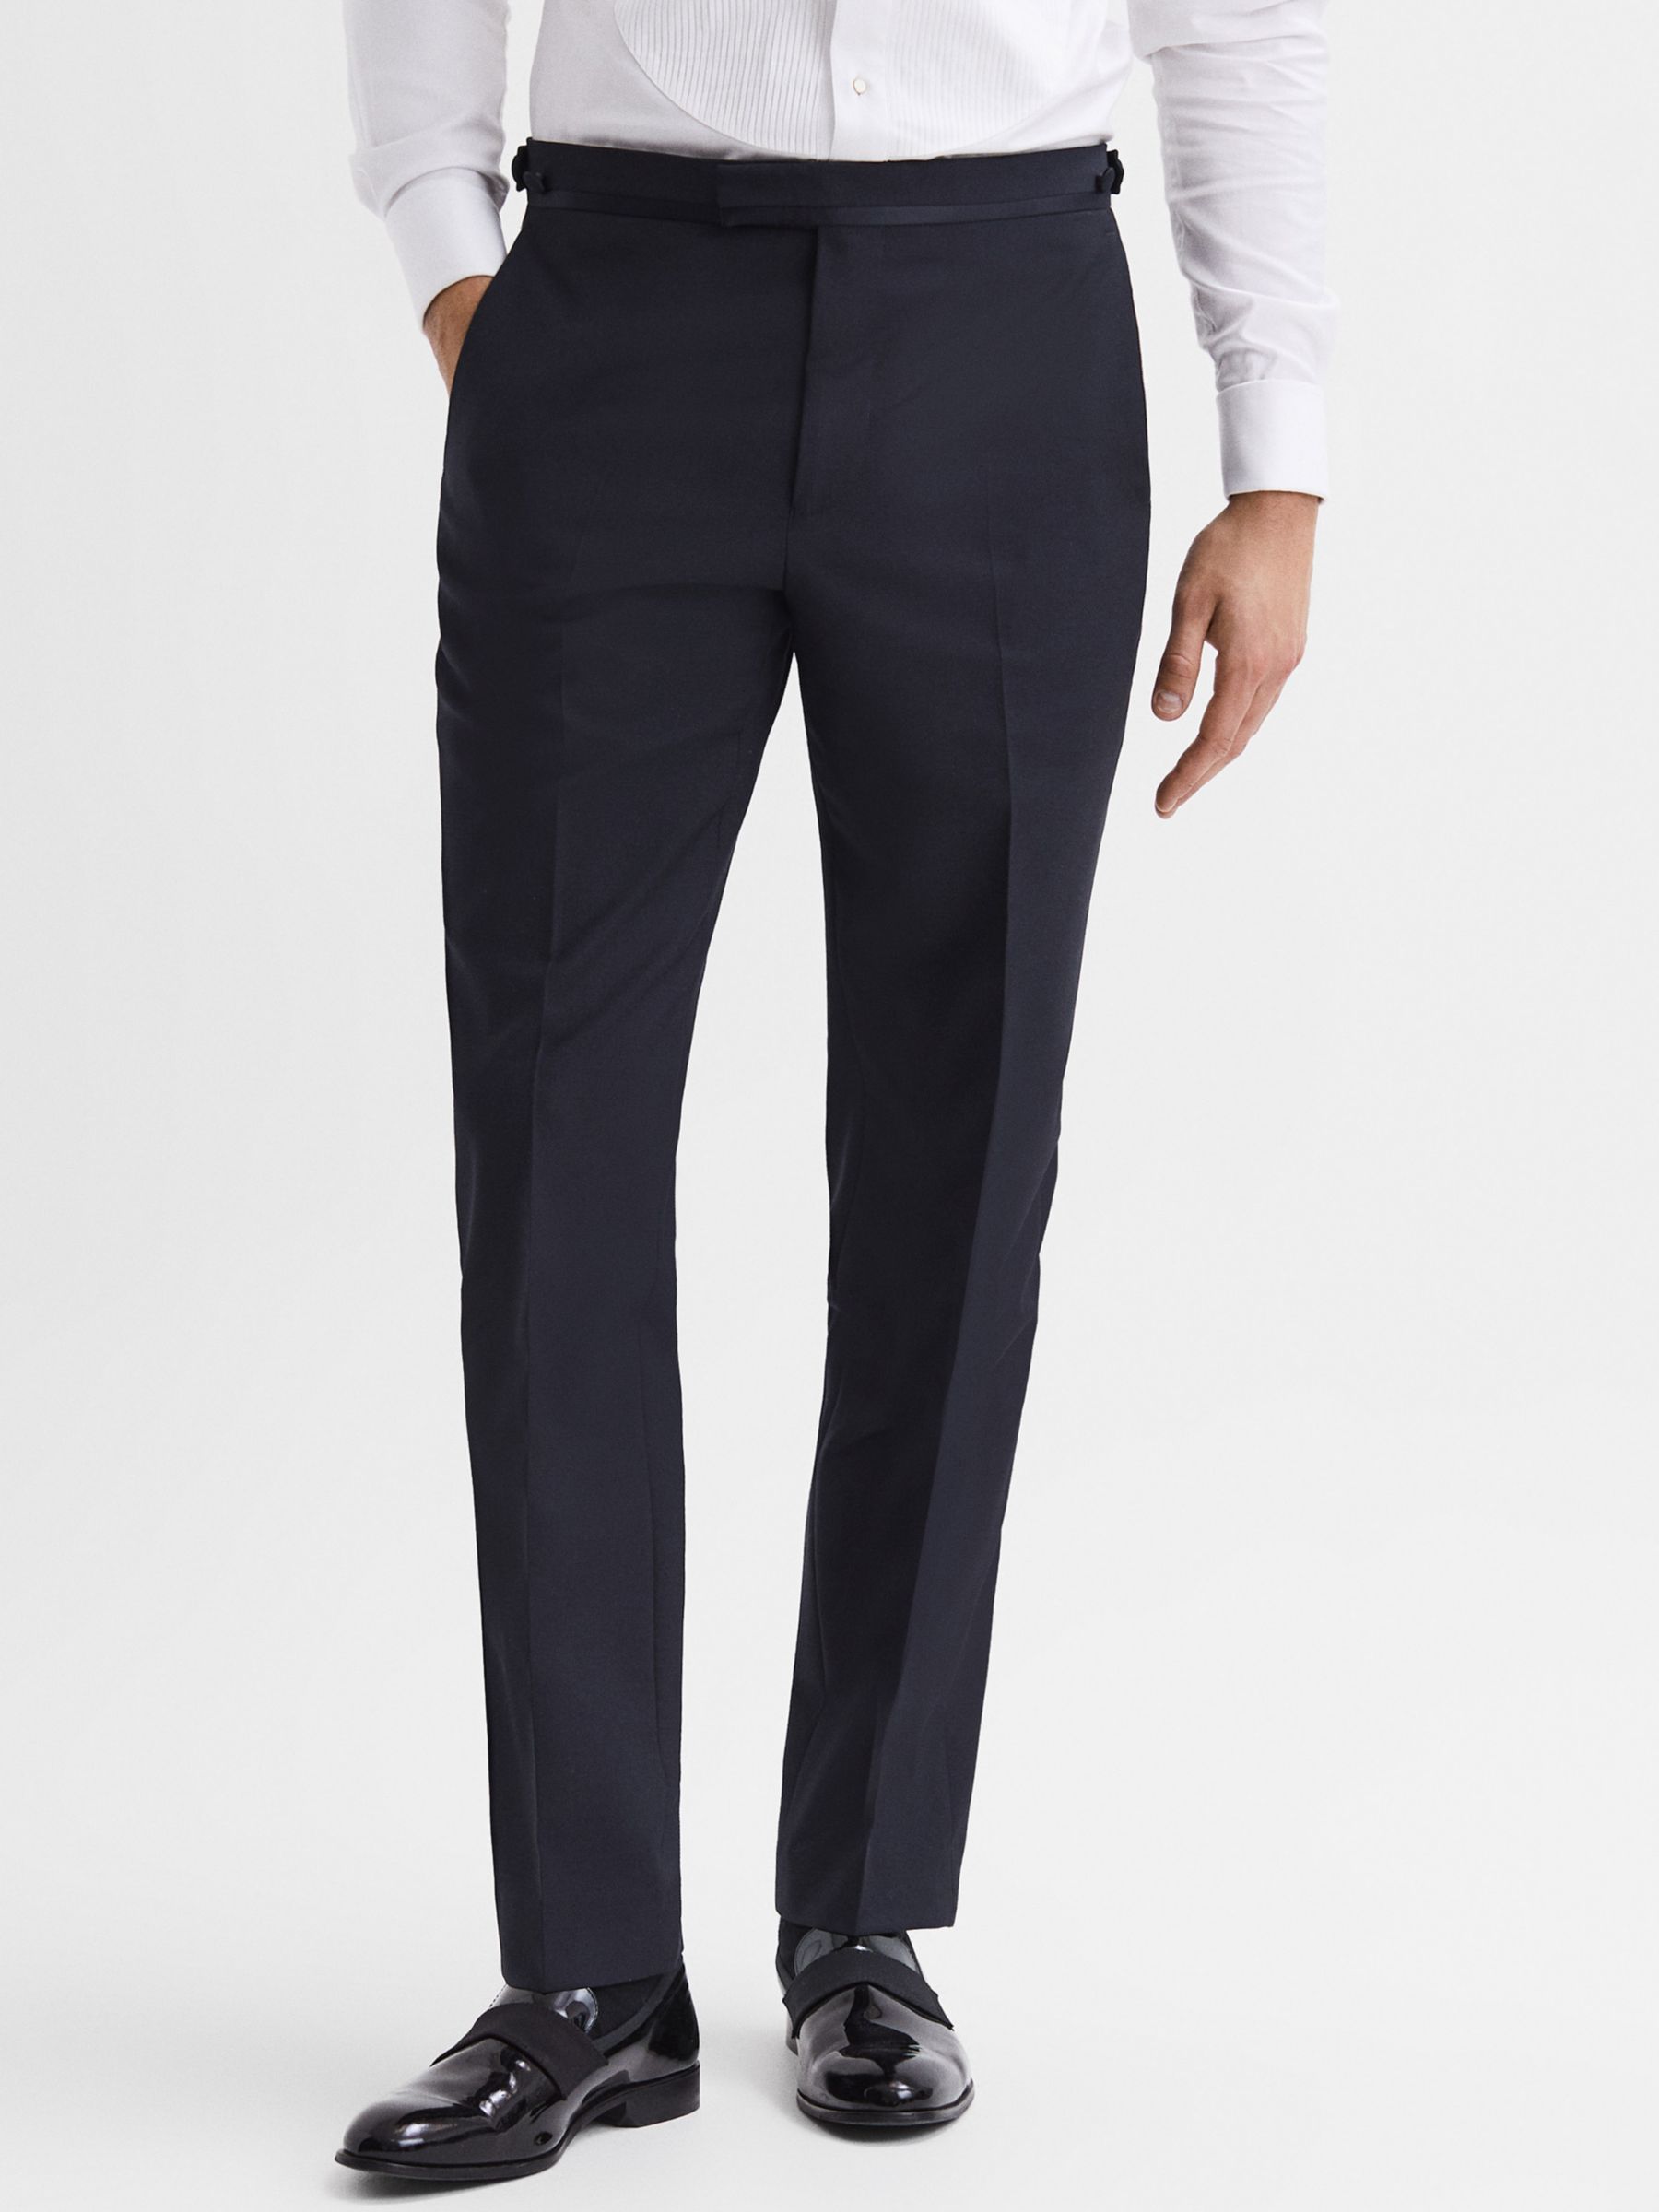 Reiss Poker Wool Blend Suit Trousers at John Lewis & Partners